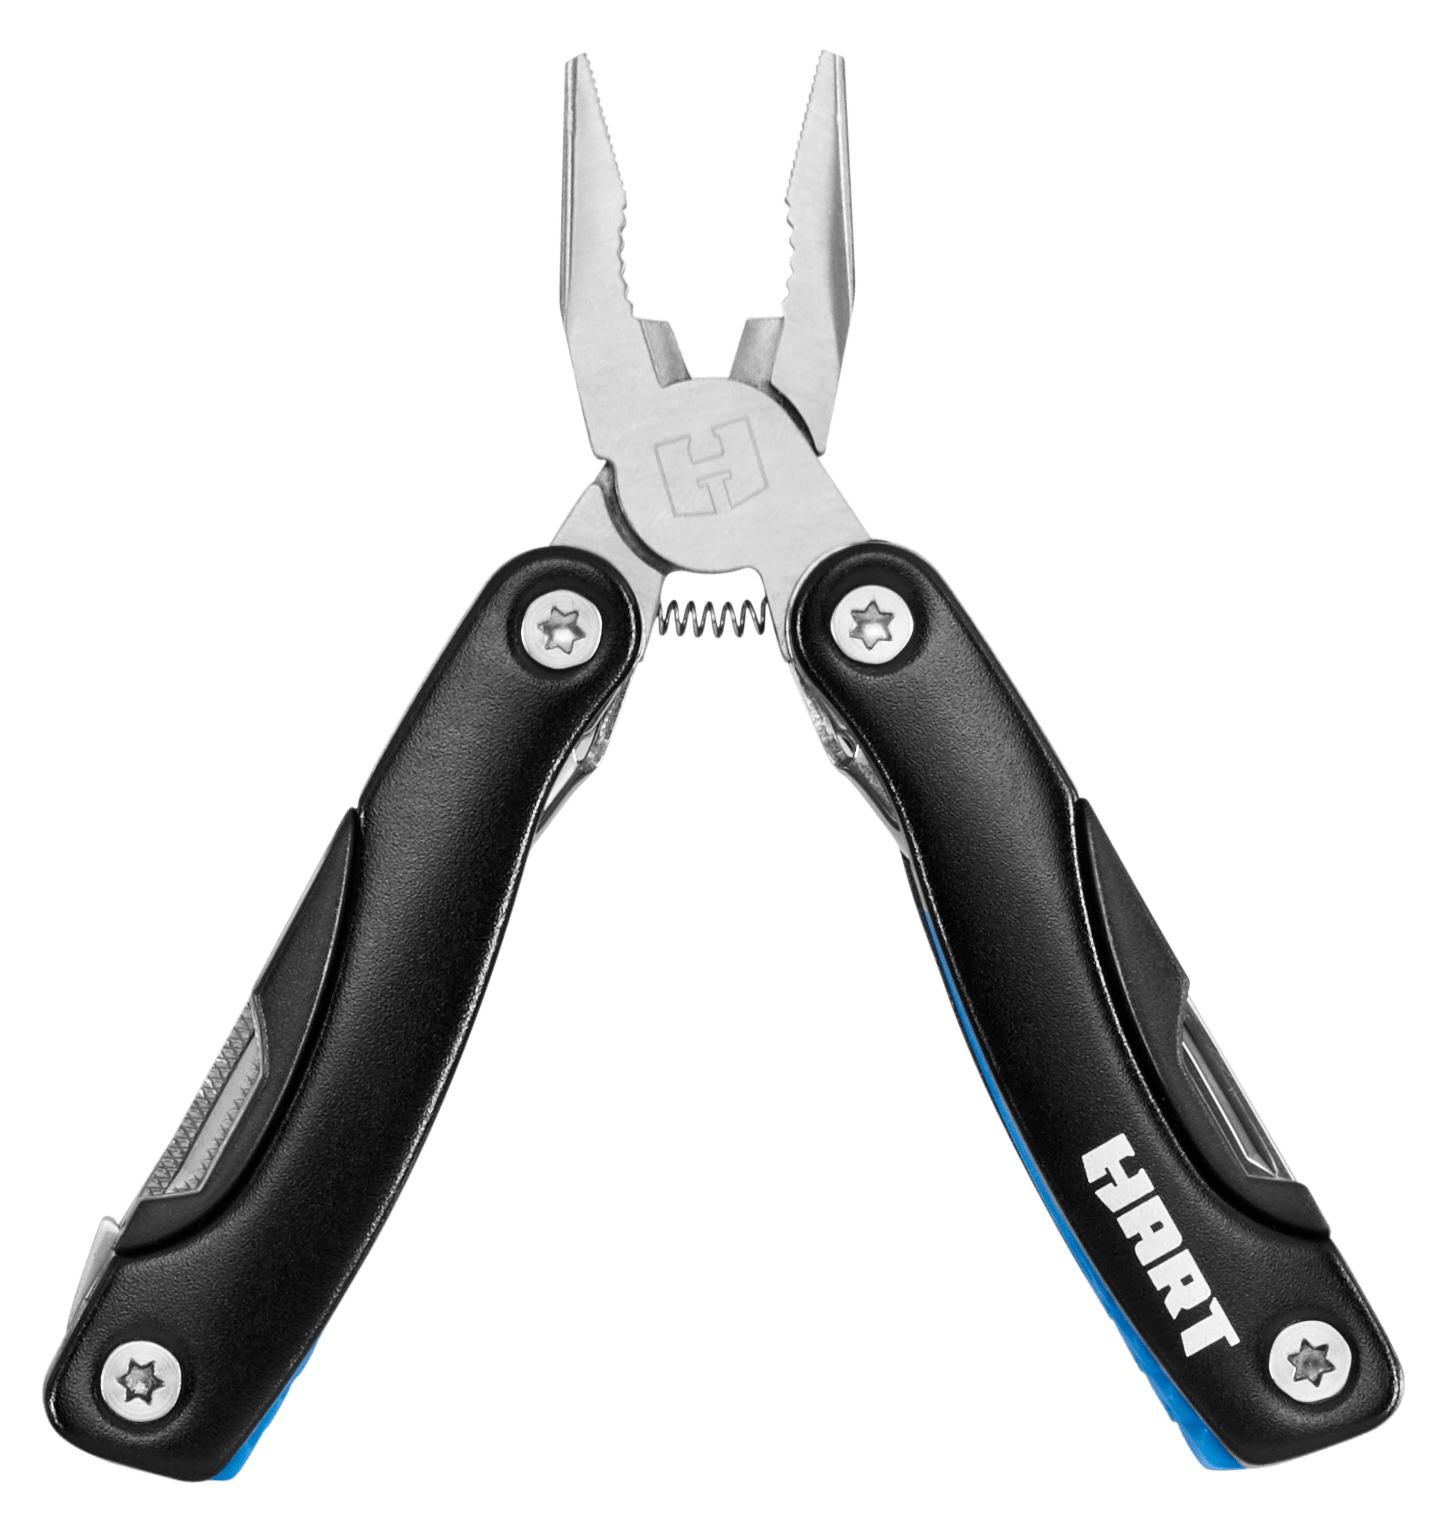 16-IN-1 Multi-Tool with Storage Pouch